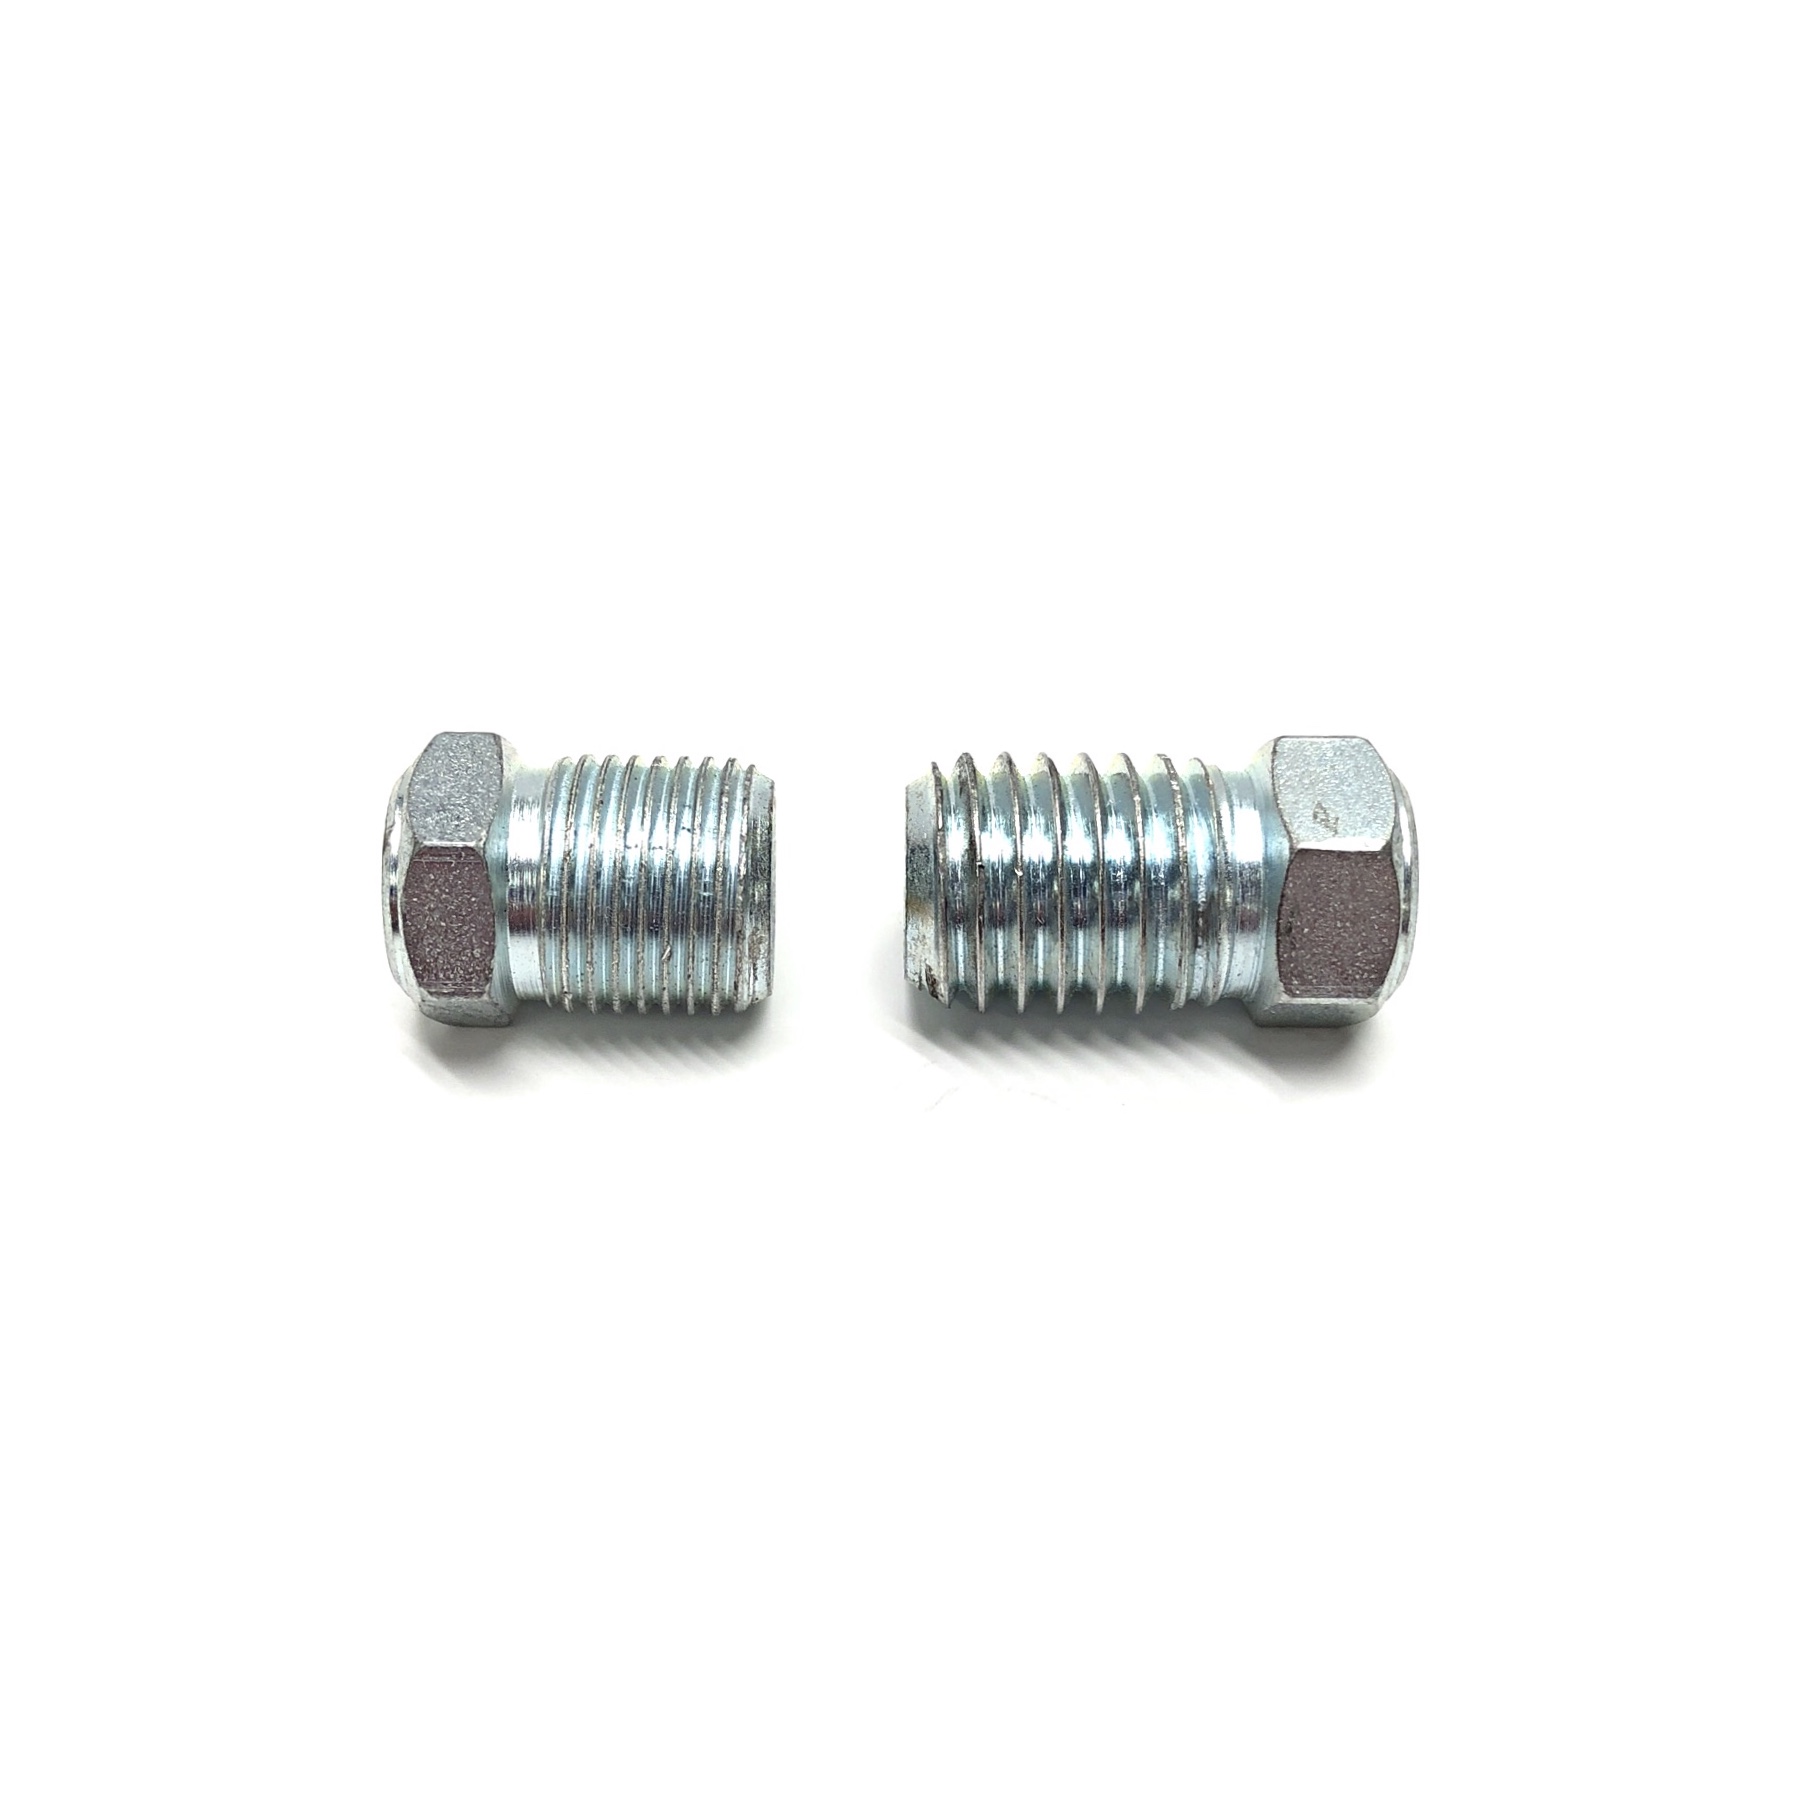 5/16" Flexicrome® Coupling Nuts